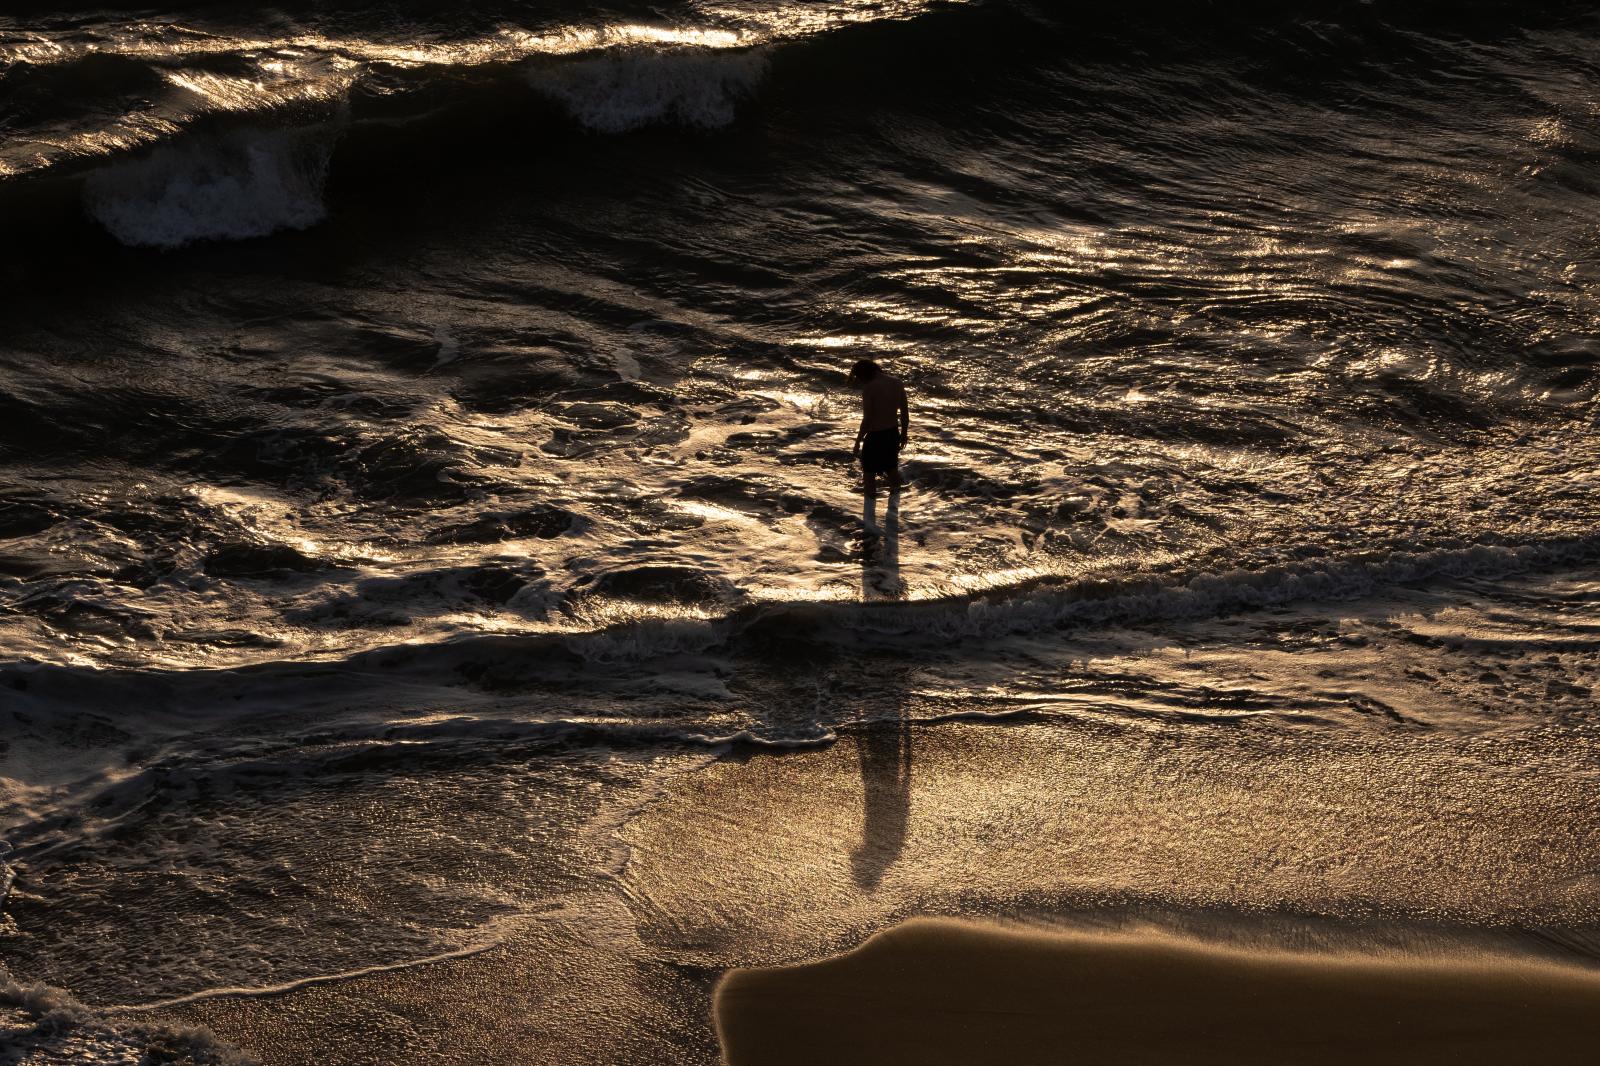 Wading in the Waves | Buy this image